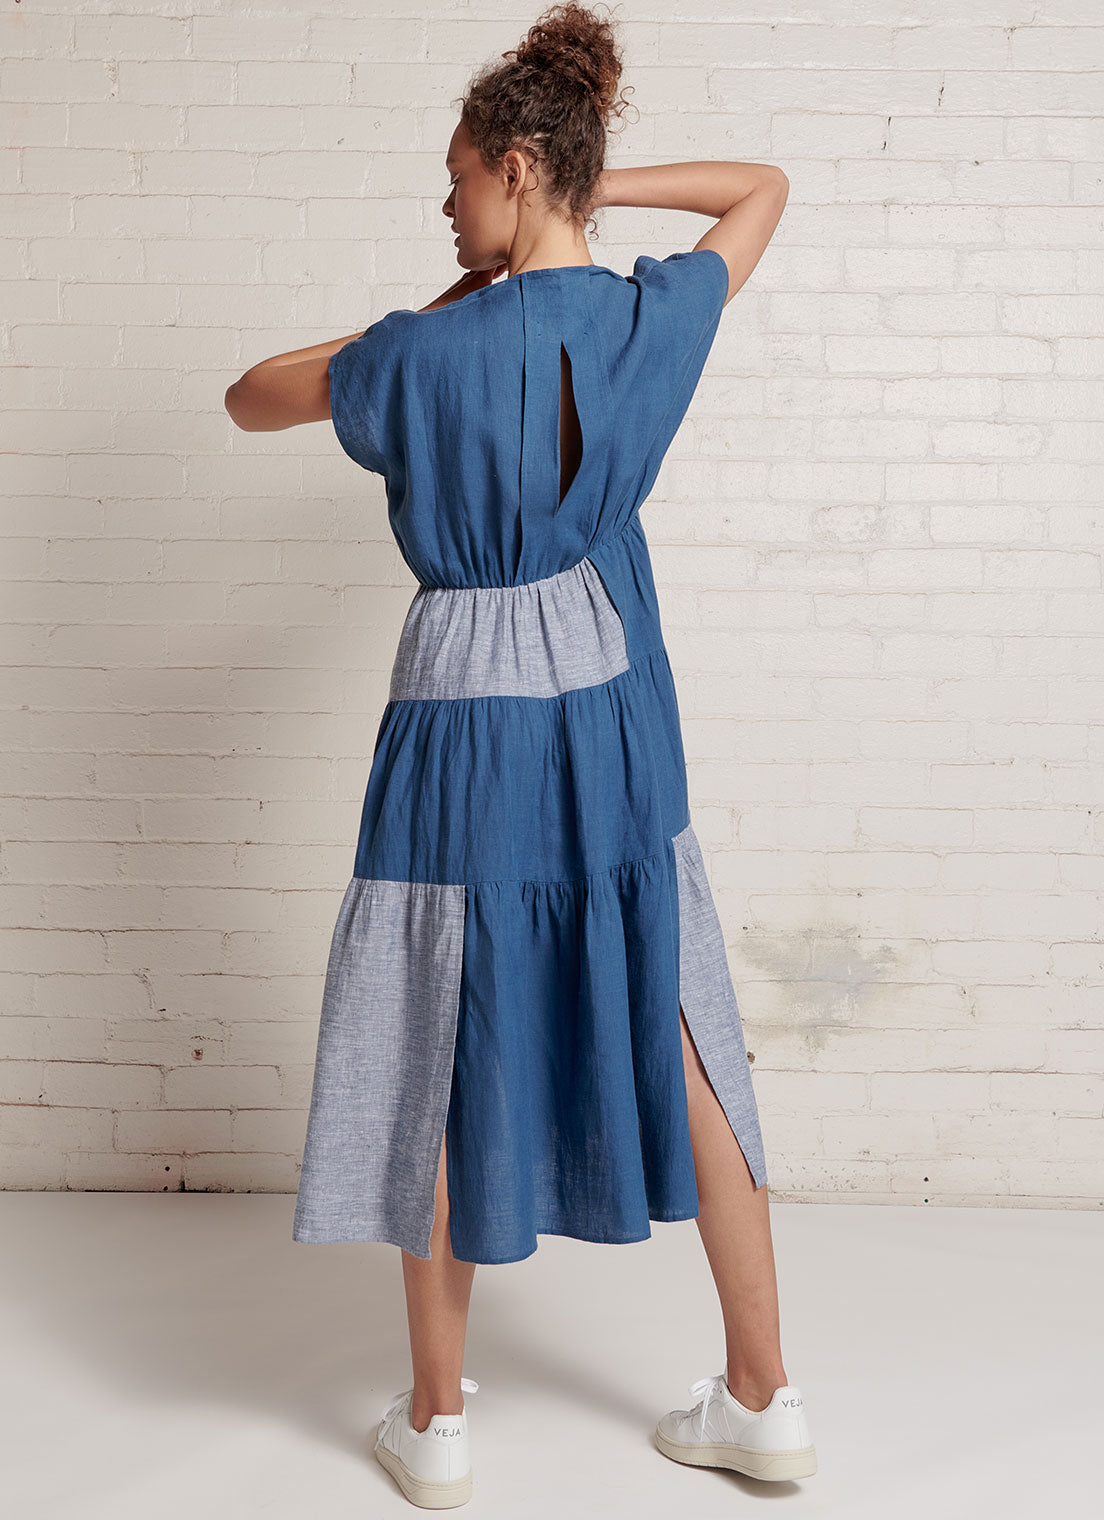 An indigo and denim two-tone, patchwork, midi tiered dress with capped sleeves, pleated detail on the neckline and at the back, elastic waist and slits on the skirt made from yarn dye washed linen